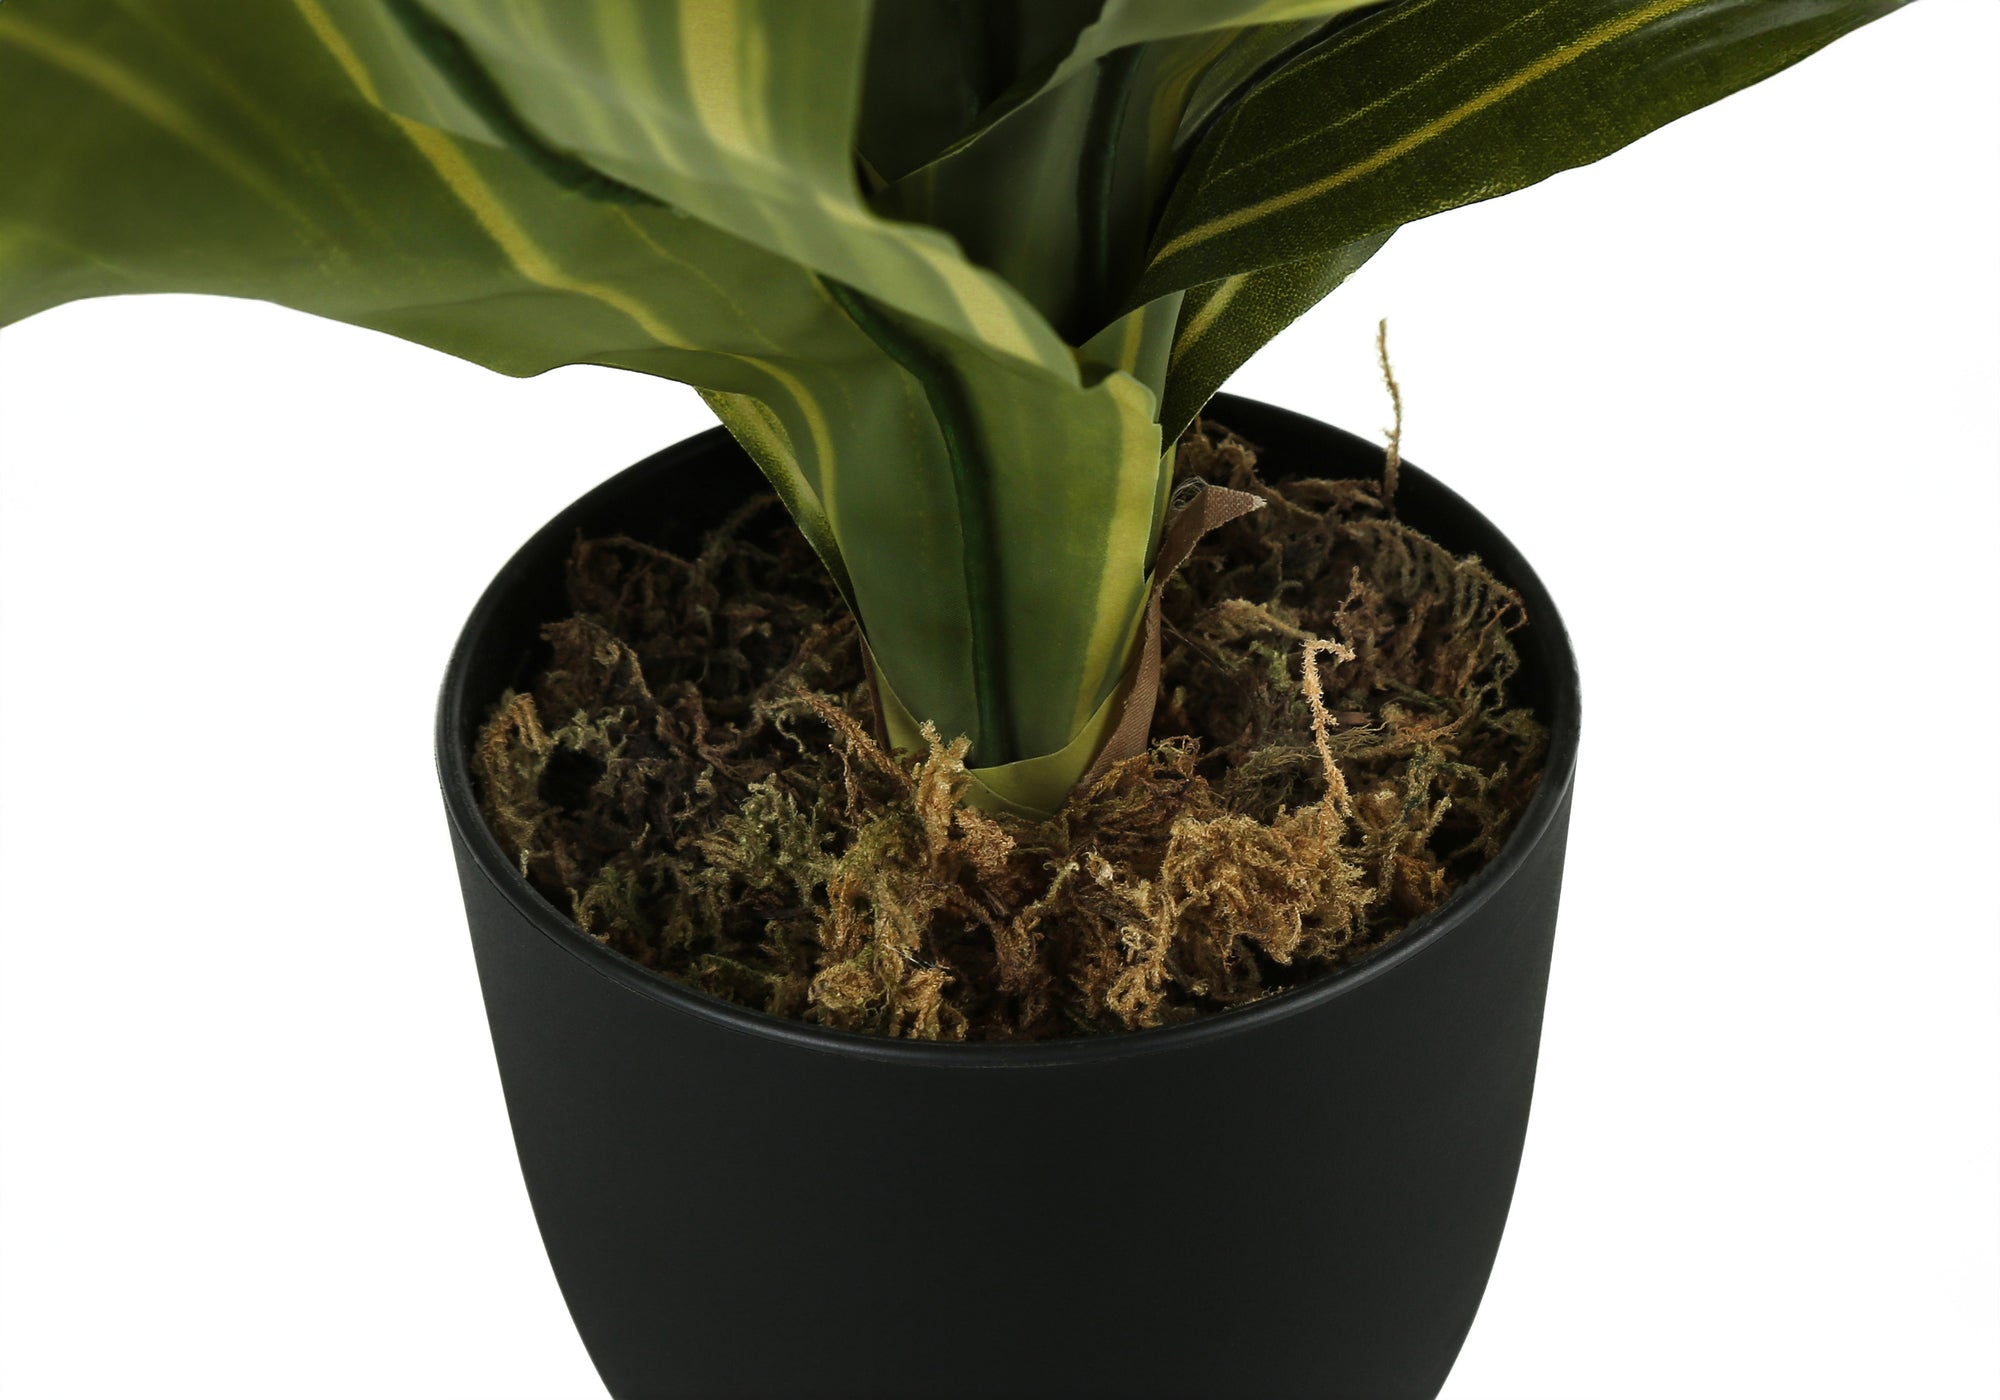 MN-649573    Artificial Plant, 17" Tall, Dracaena, Indoor, Faux, Fake, Table, Greenery, Potted, Real Touch, Decorative, Green Leaves, Black Pot